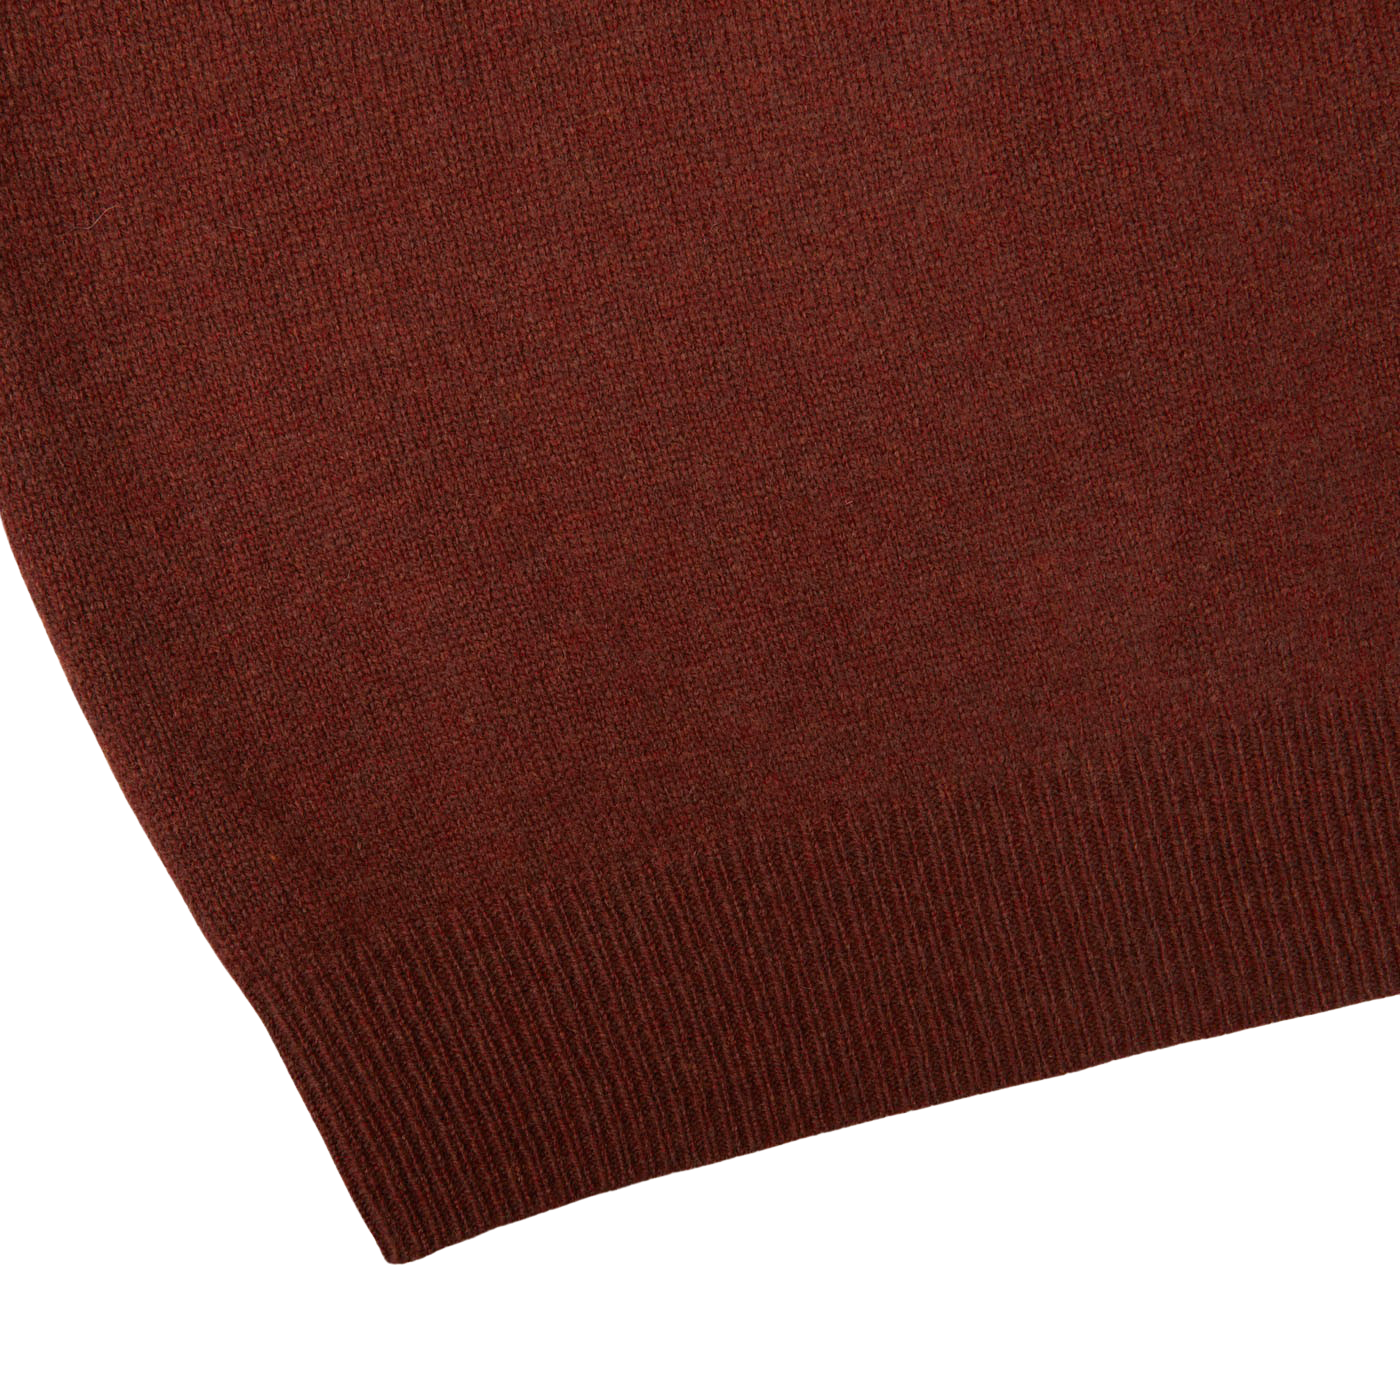 A close up of a Nebula Red Brown Lambswool V-Neck sweater by Alan Paine on a white surface, made with Australian lambswool.